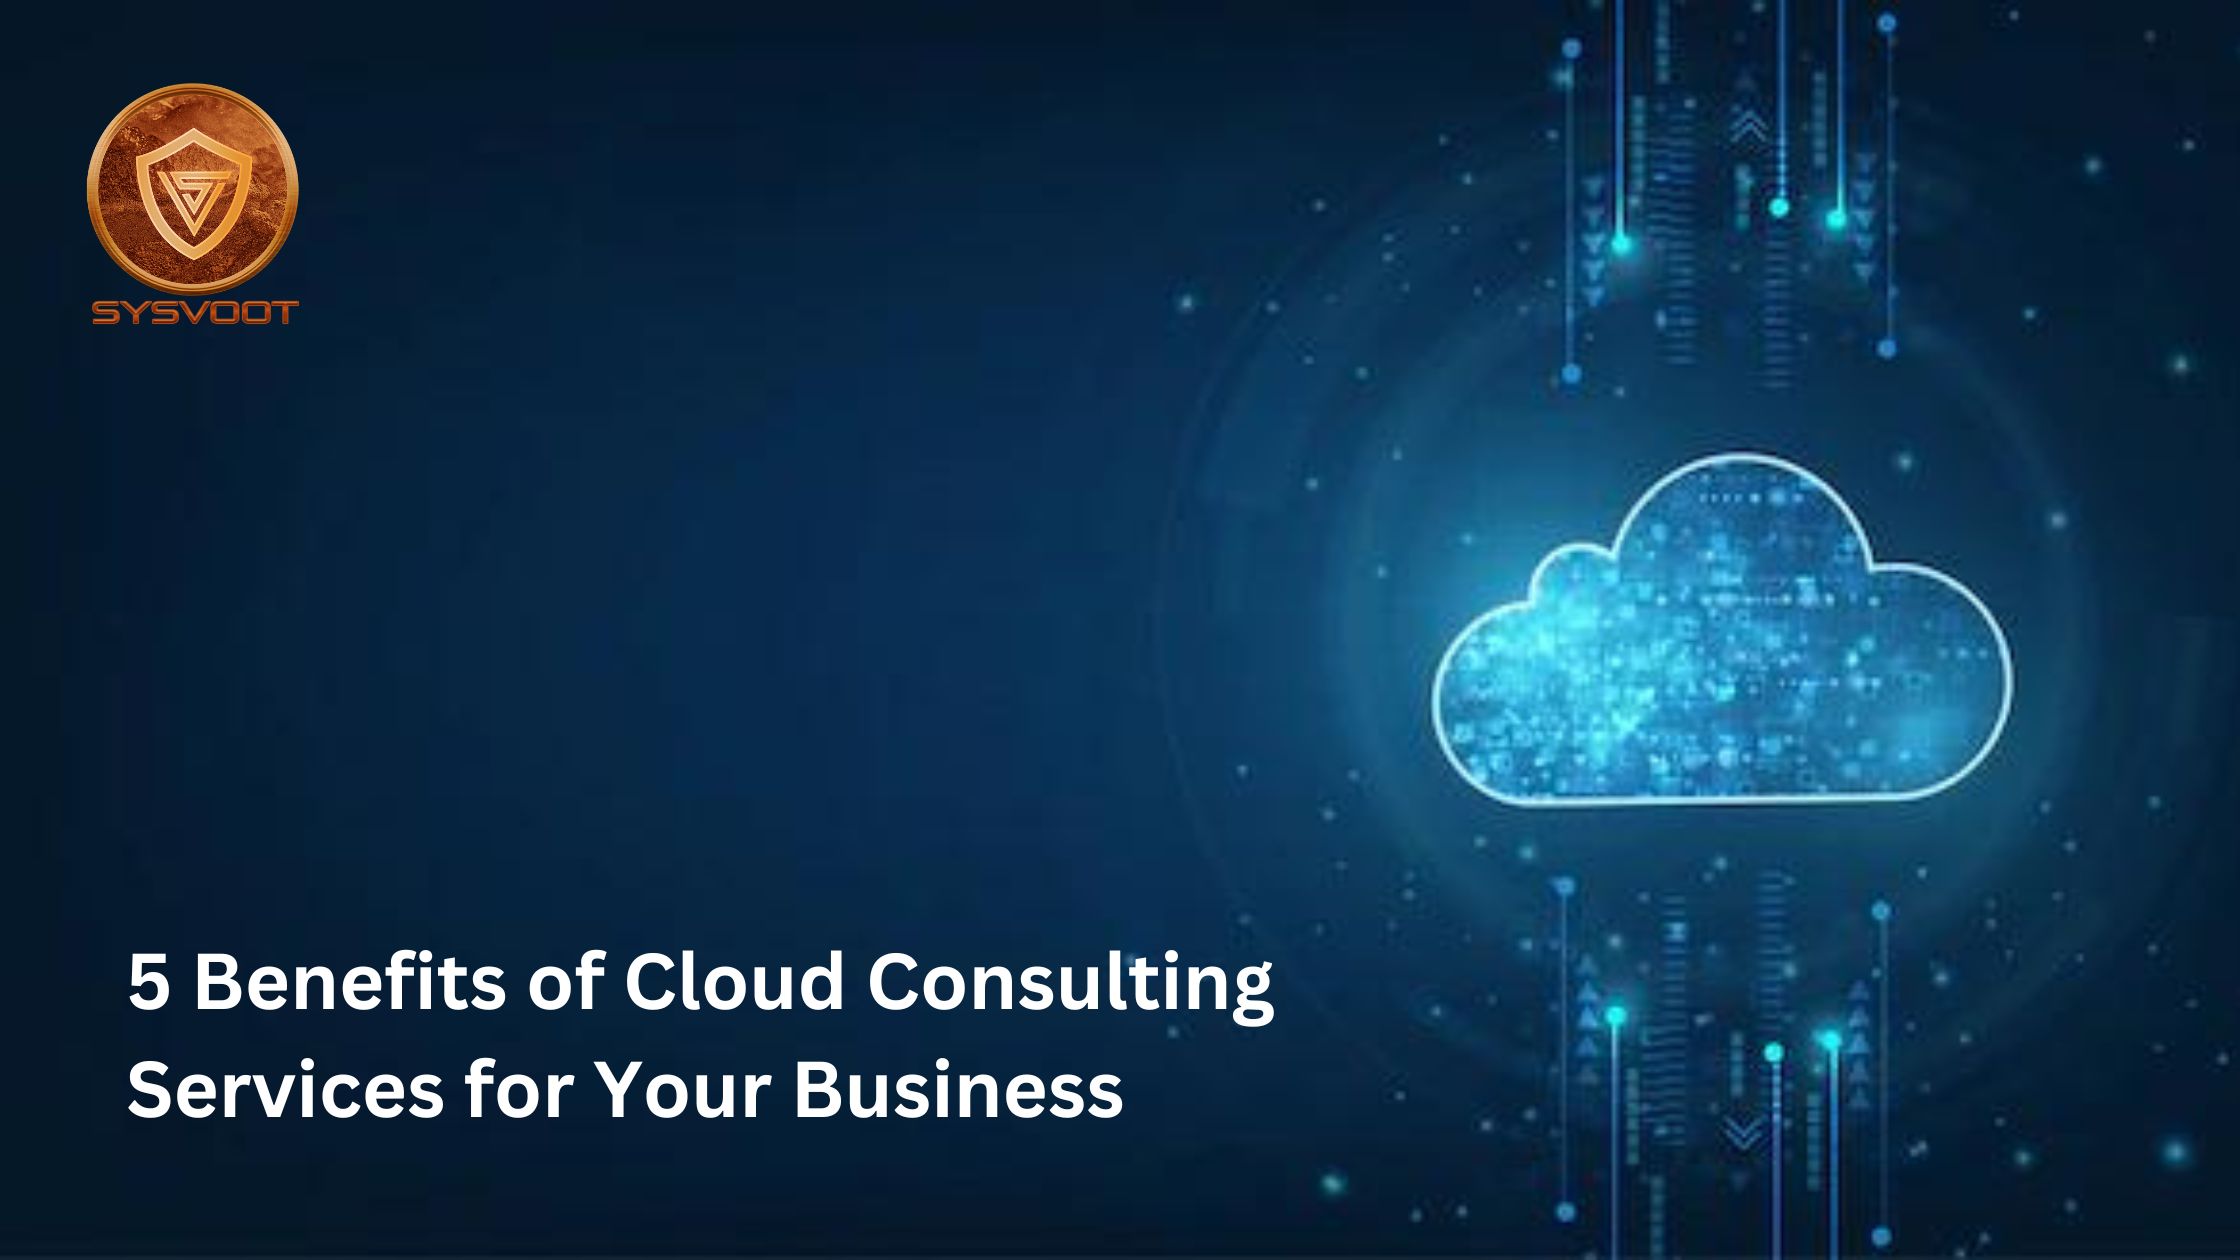 5 Benefits of Cloud Consulting Services for Your Business-06aa3a72